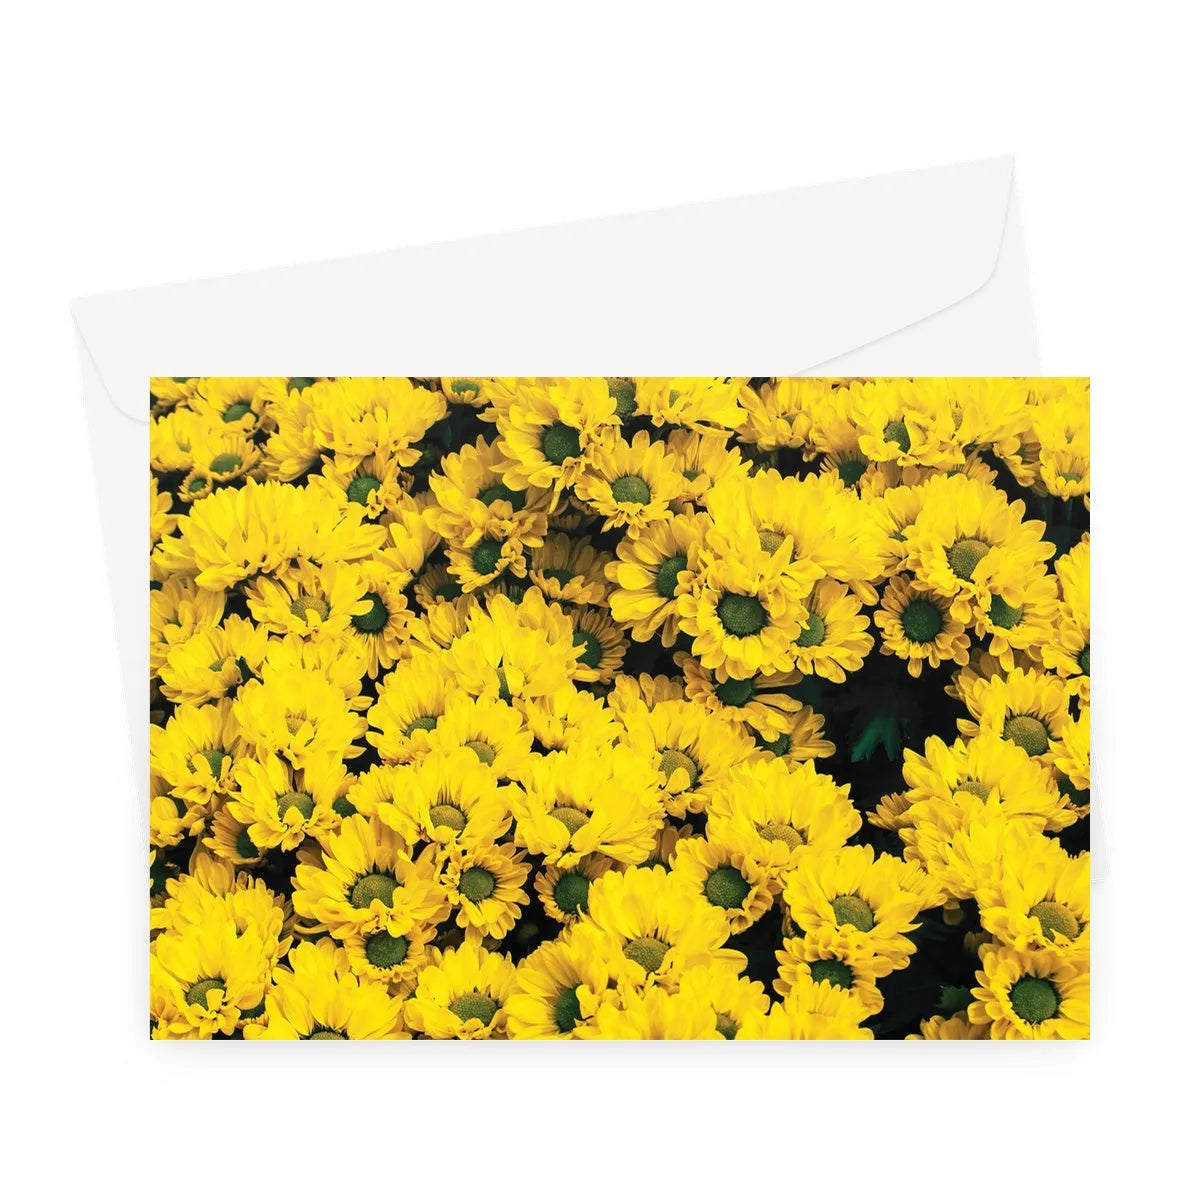 Yellow Brick Road Greeting Card - A5 Landscape / 10 Cards - Greeting & Note Cards - Aesthetic Art